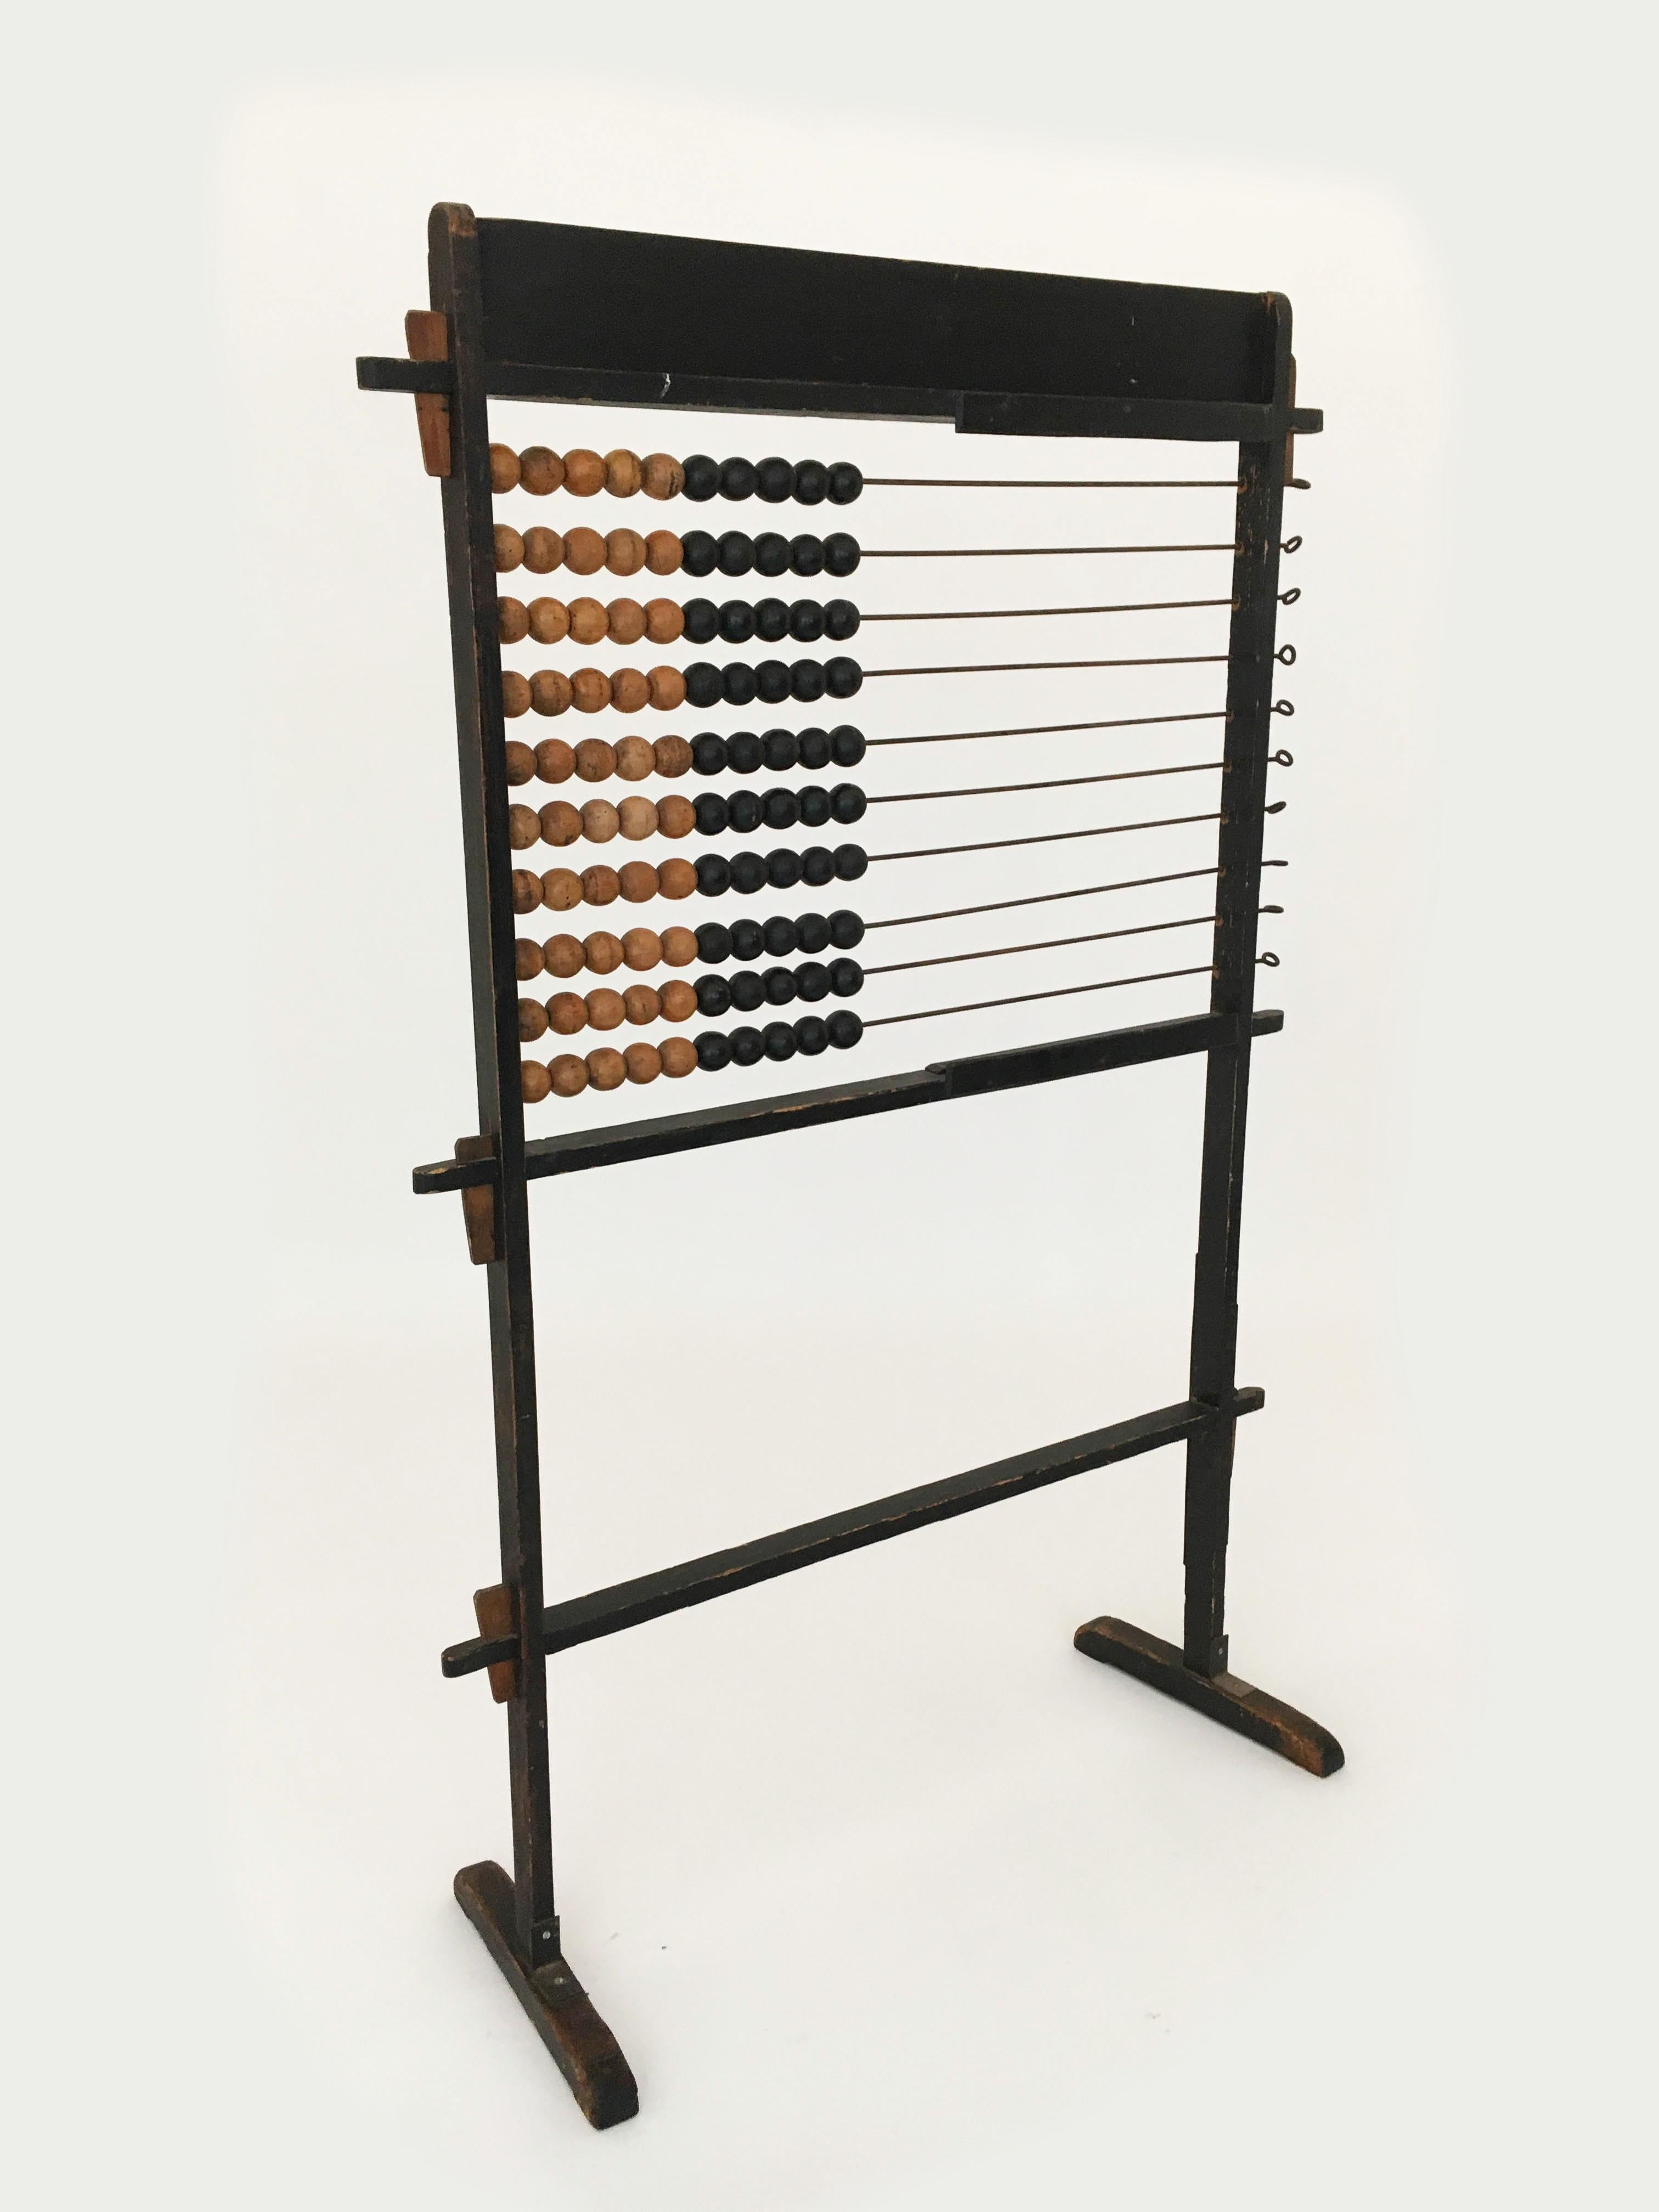 Form Follows Function Modern Abstract Abacus Obsolete Object, France, 1920s For Sale 3